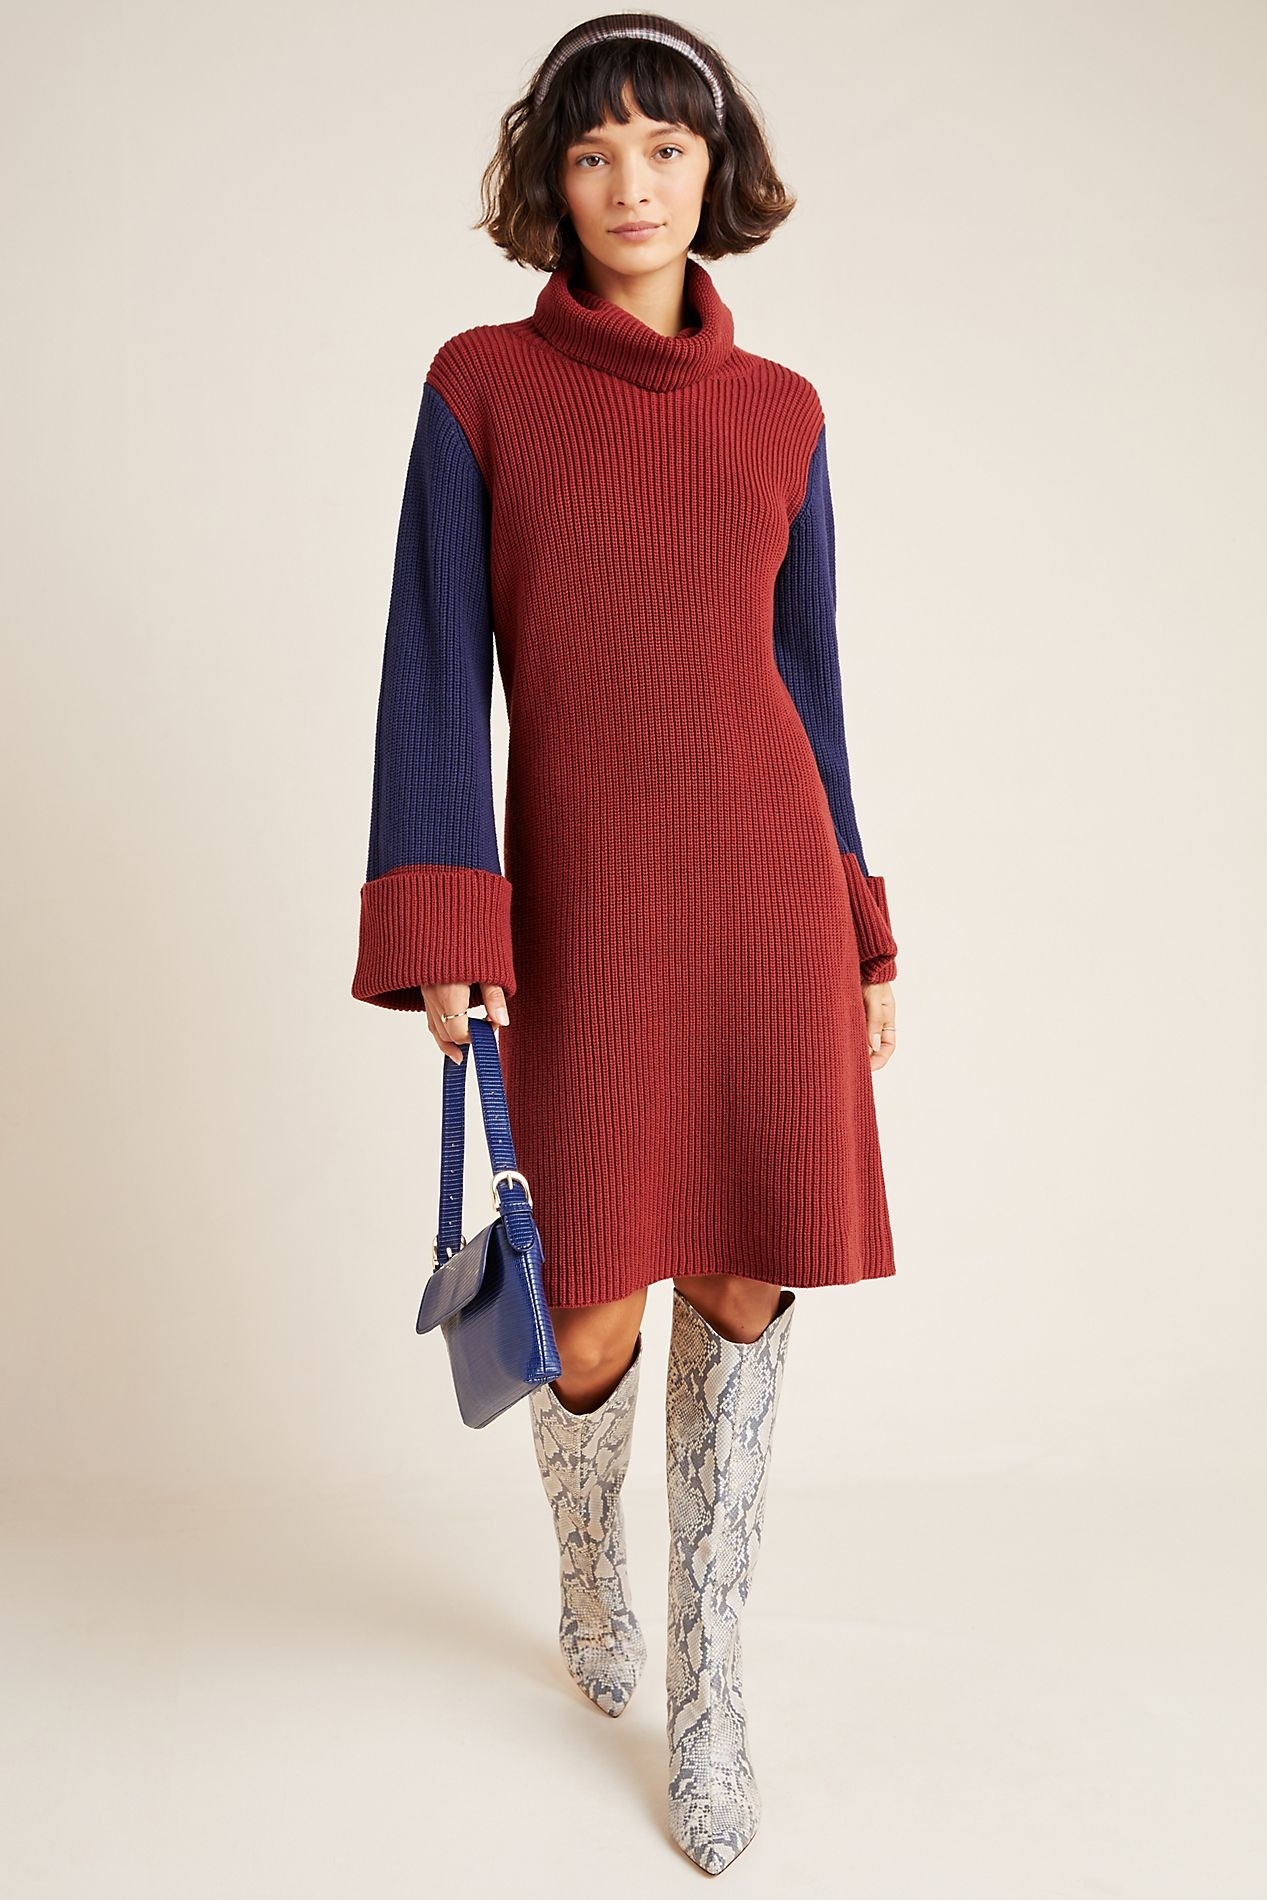 36 Gorgeous And Warm Sweater Dresses For People Who Just Really Hate Pants